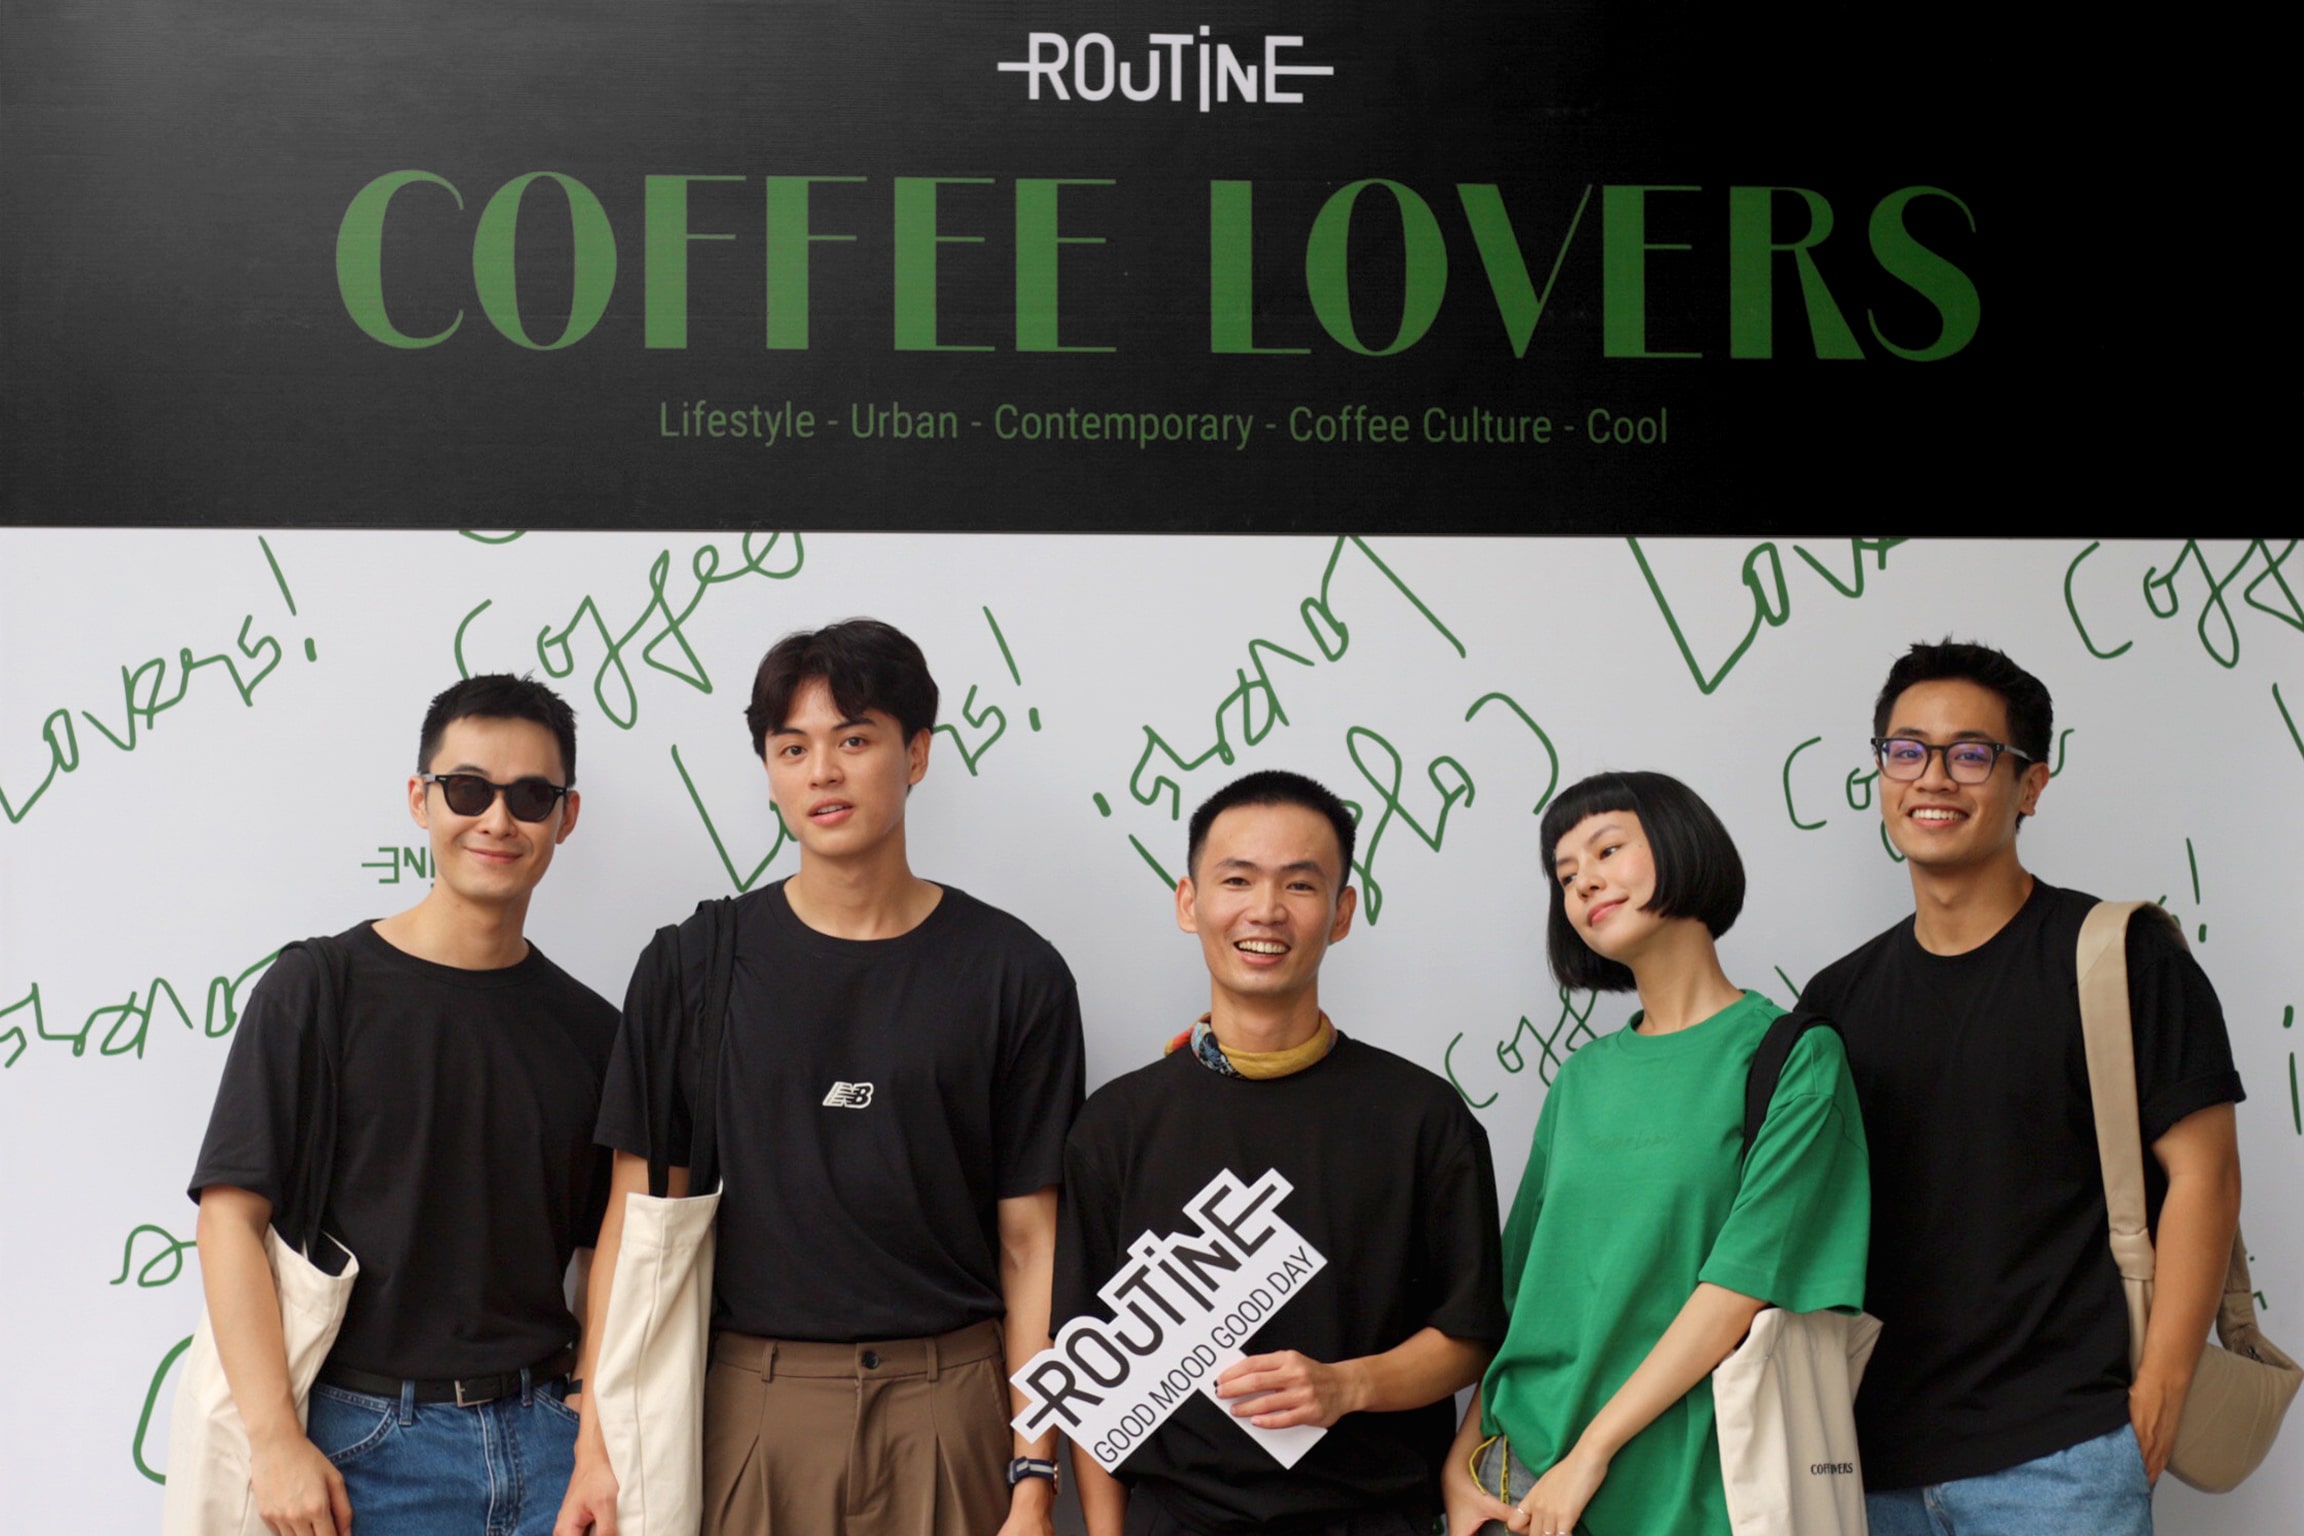 [Recap Event] Sự kiện ra mắt Coffee Lovers Collection & Workshop Coffee